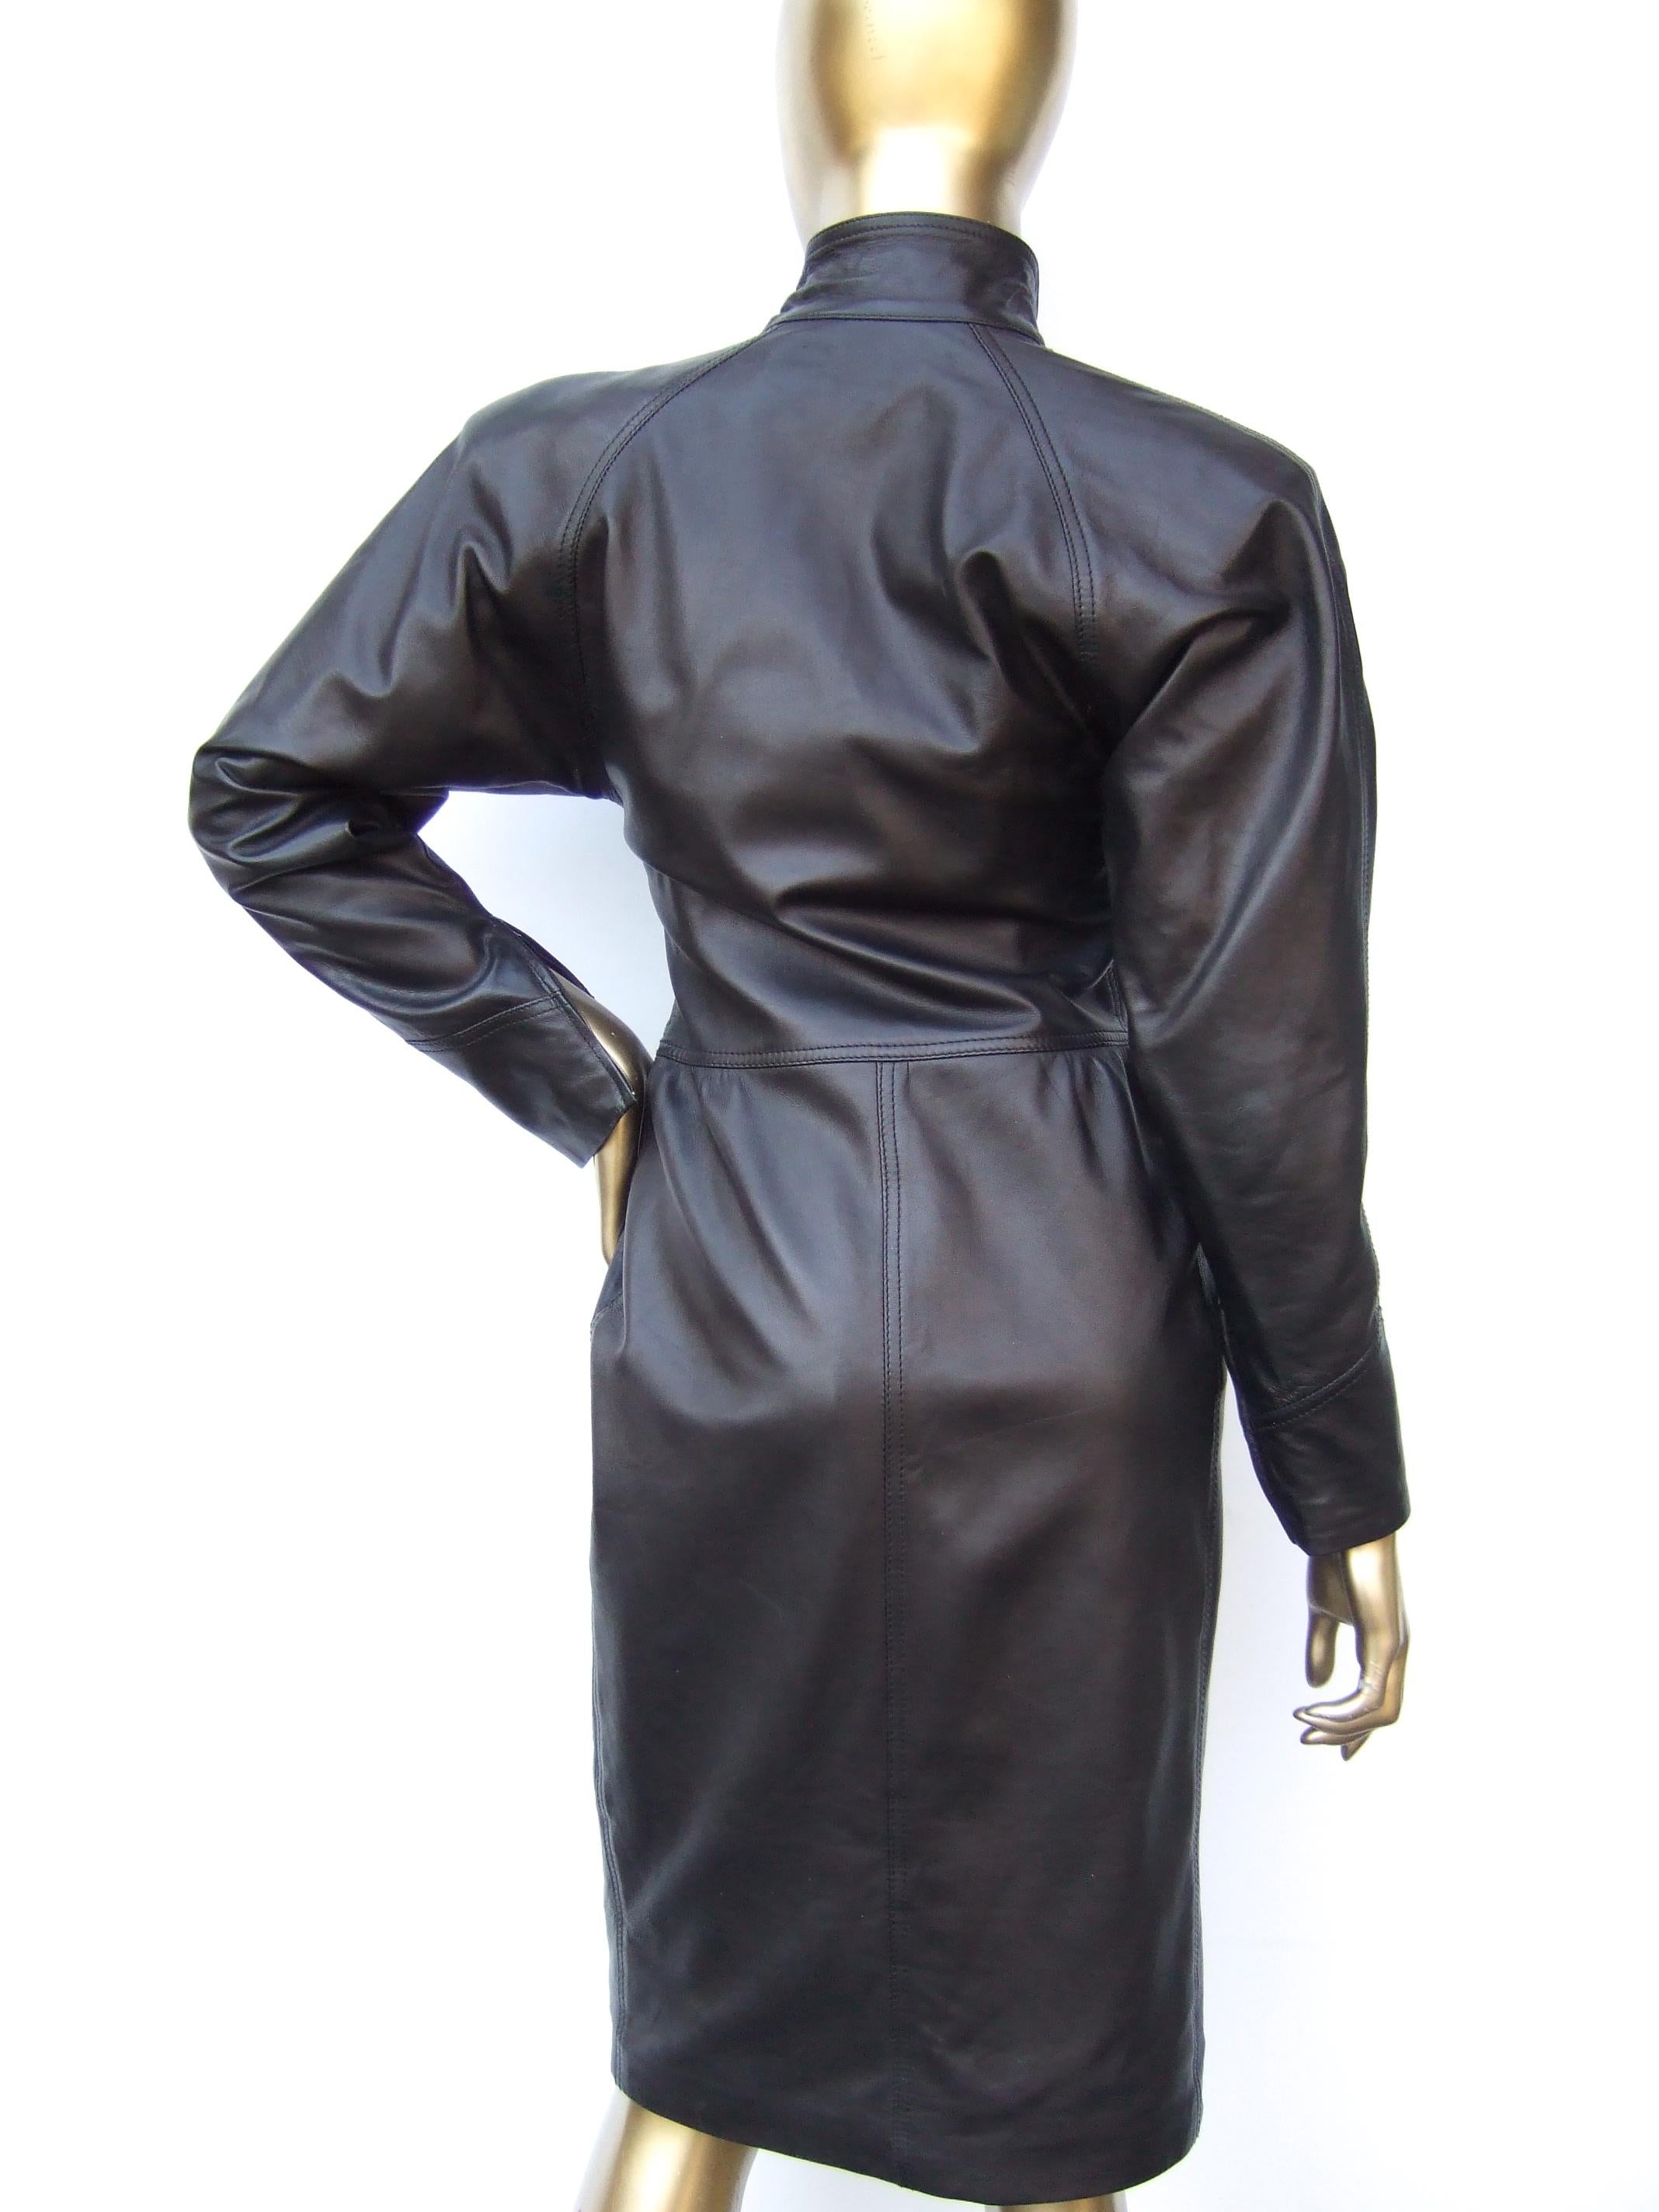 Emanuel Ungaro Paris Avant-garde Edgy Brown Leather Dress Made in Italy c 1980s For Sale 2